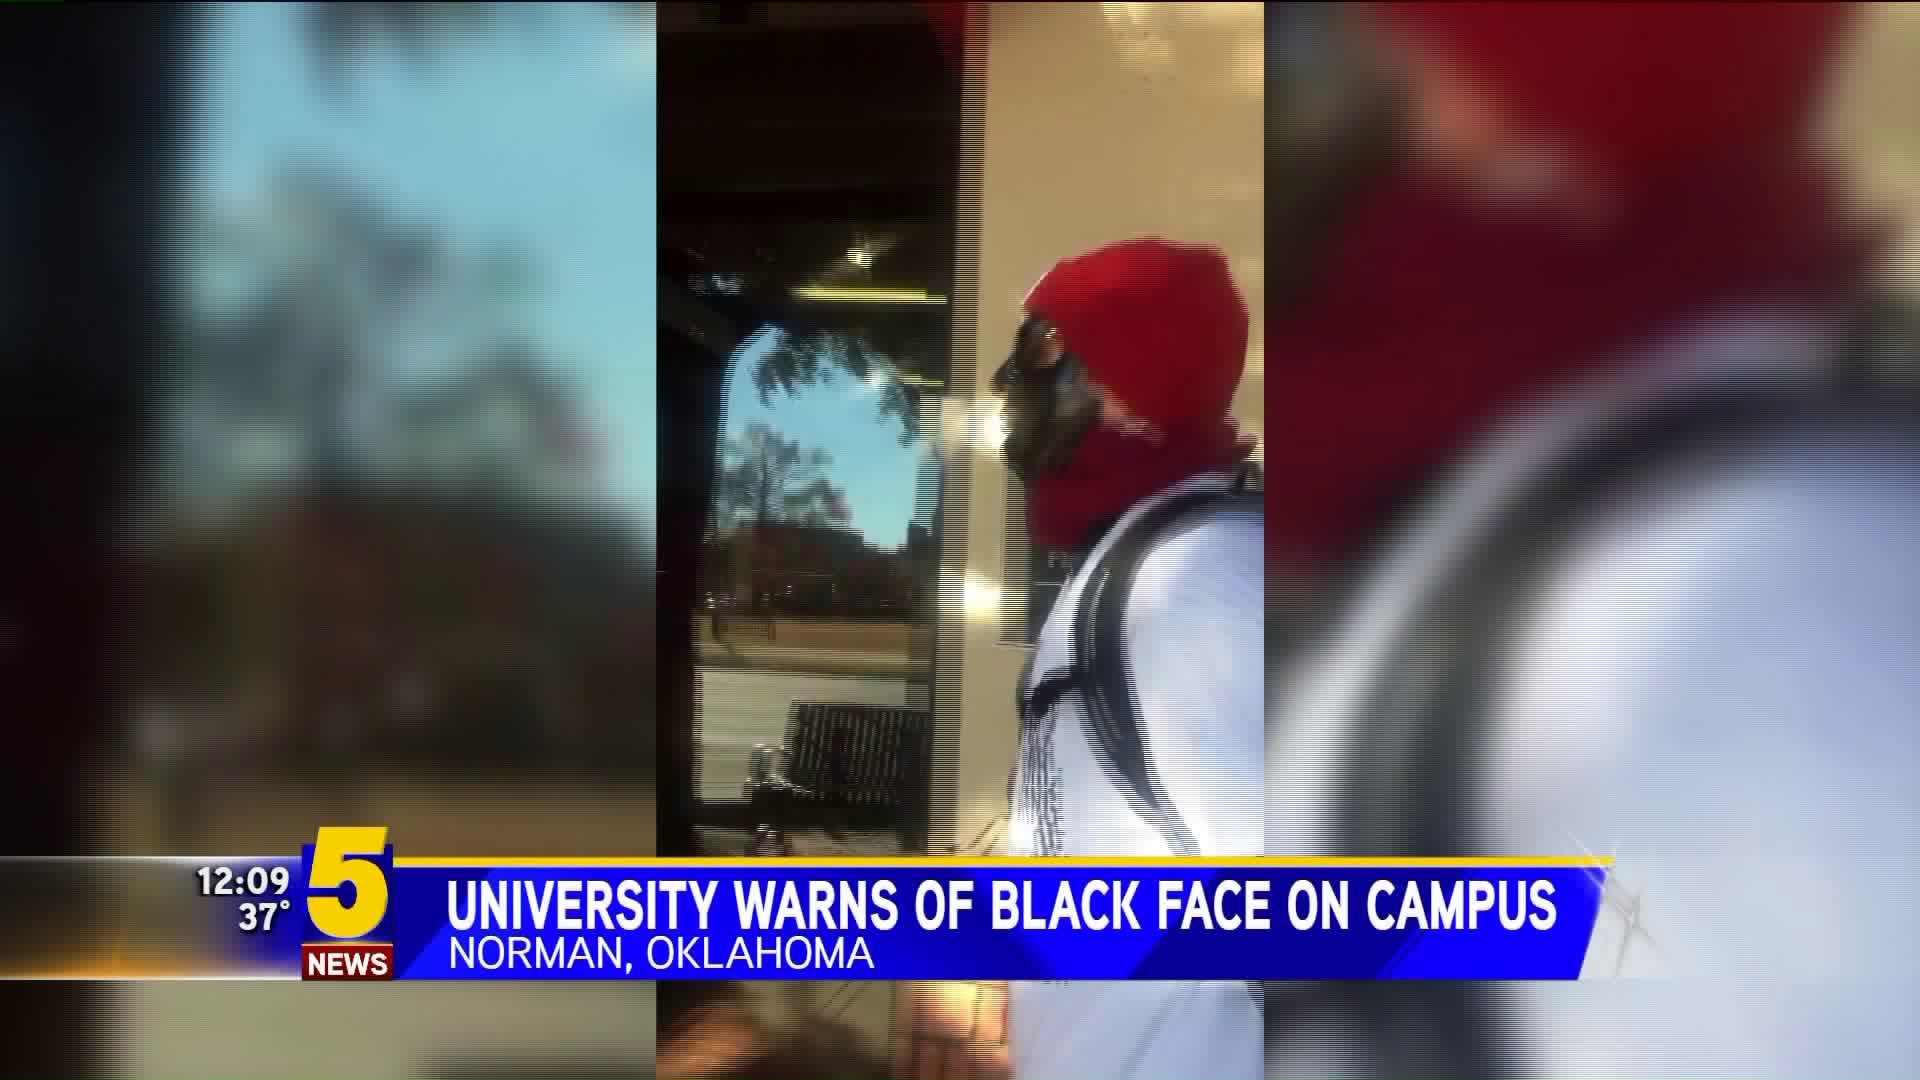 Another "Black Face" Incident Reproted On OU Campus